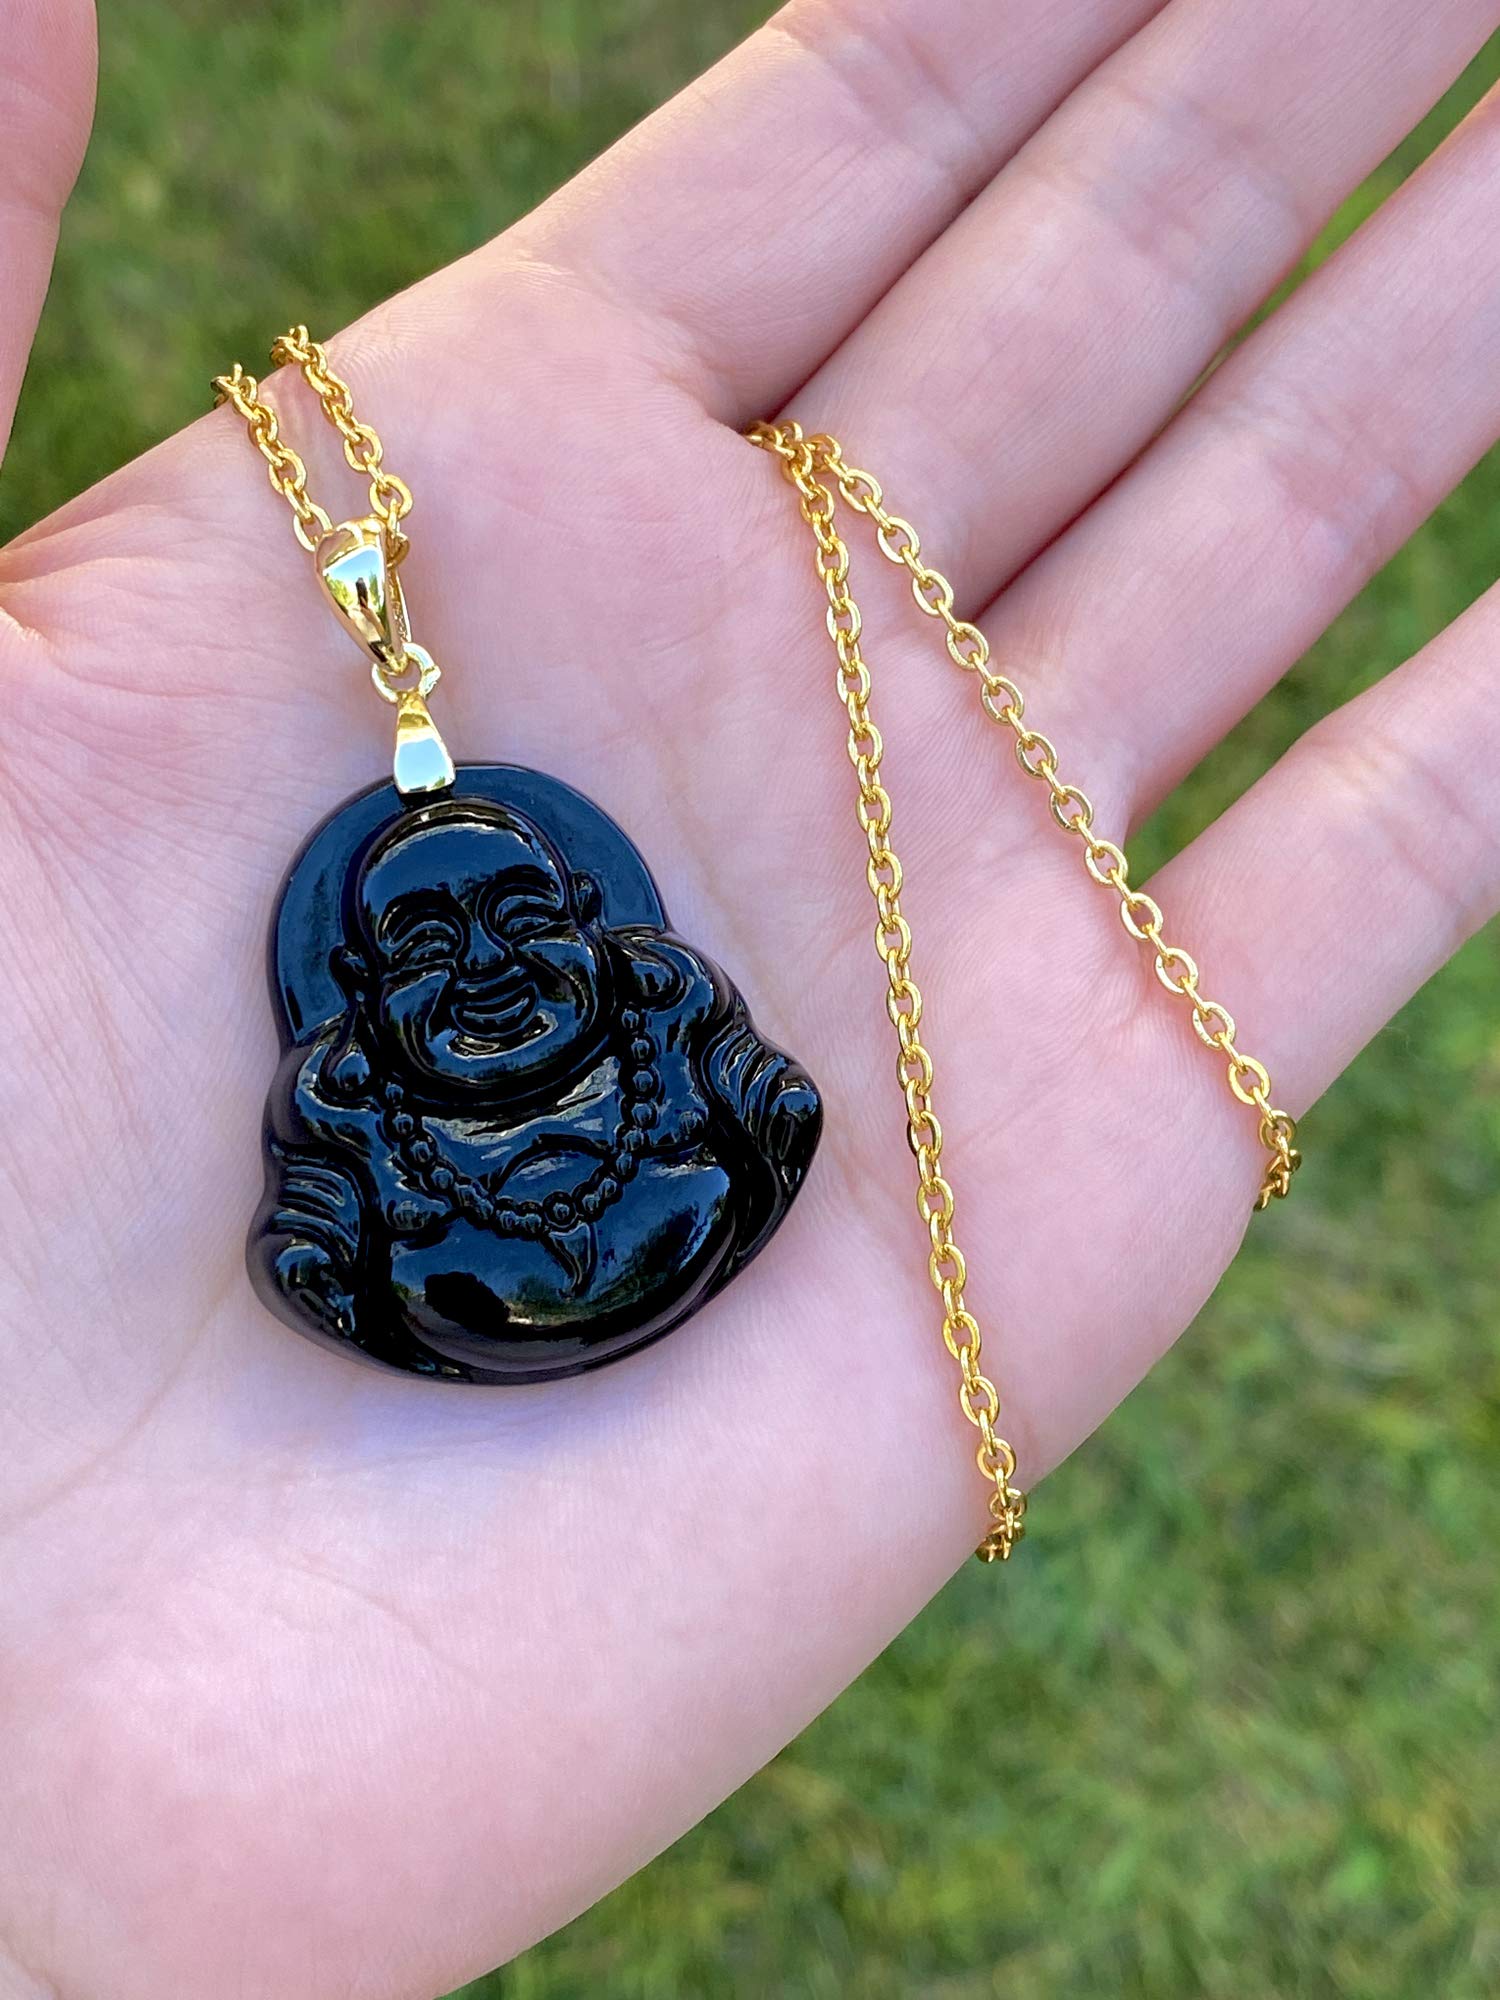 Shop-iGold Happy Laughing Buddha Black Jade Pendant Necklace Open Rolo Box Chain Genuine Certified Grade A Jadeite Jade Hand Crafted